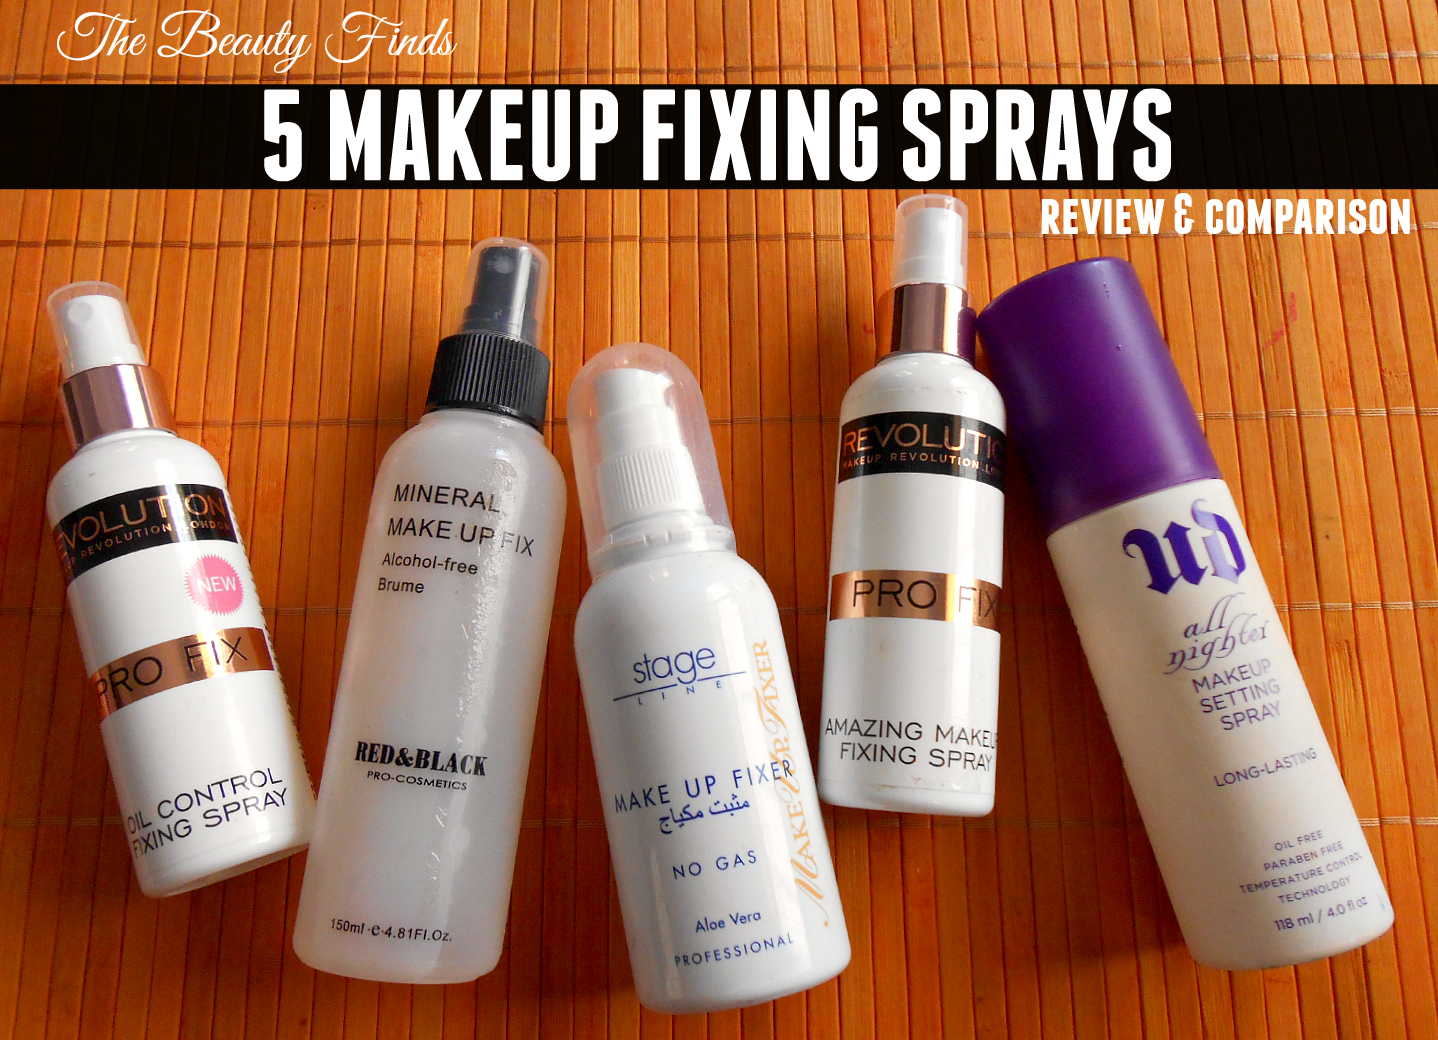 The Beauty Finds: 5 Makeup Fixing Sprays - Review & Comparison